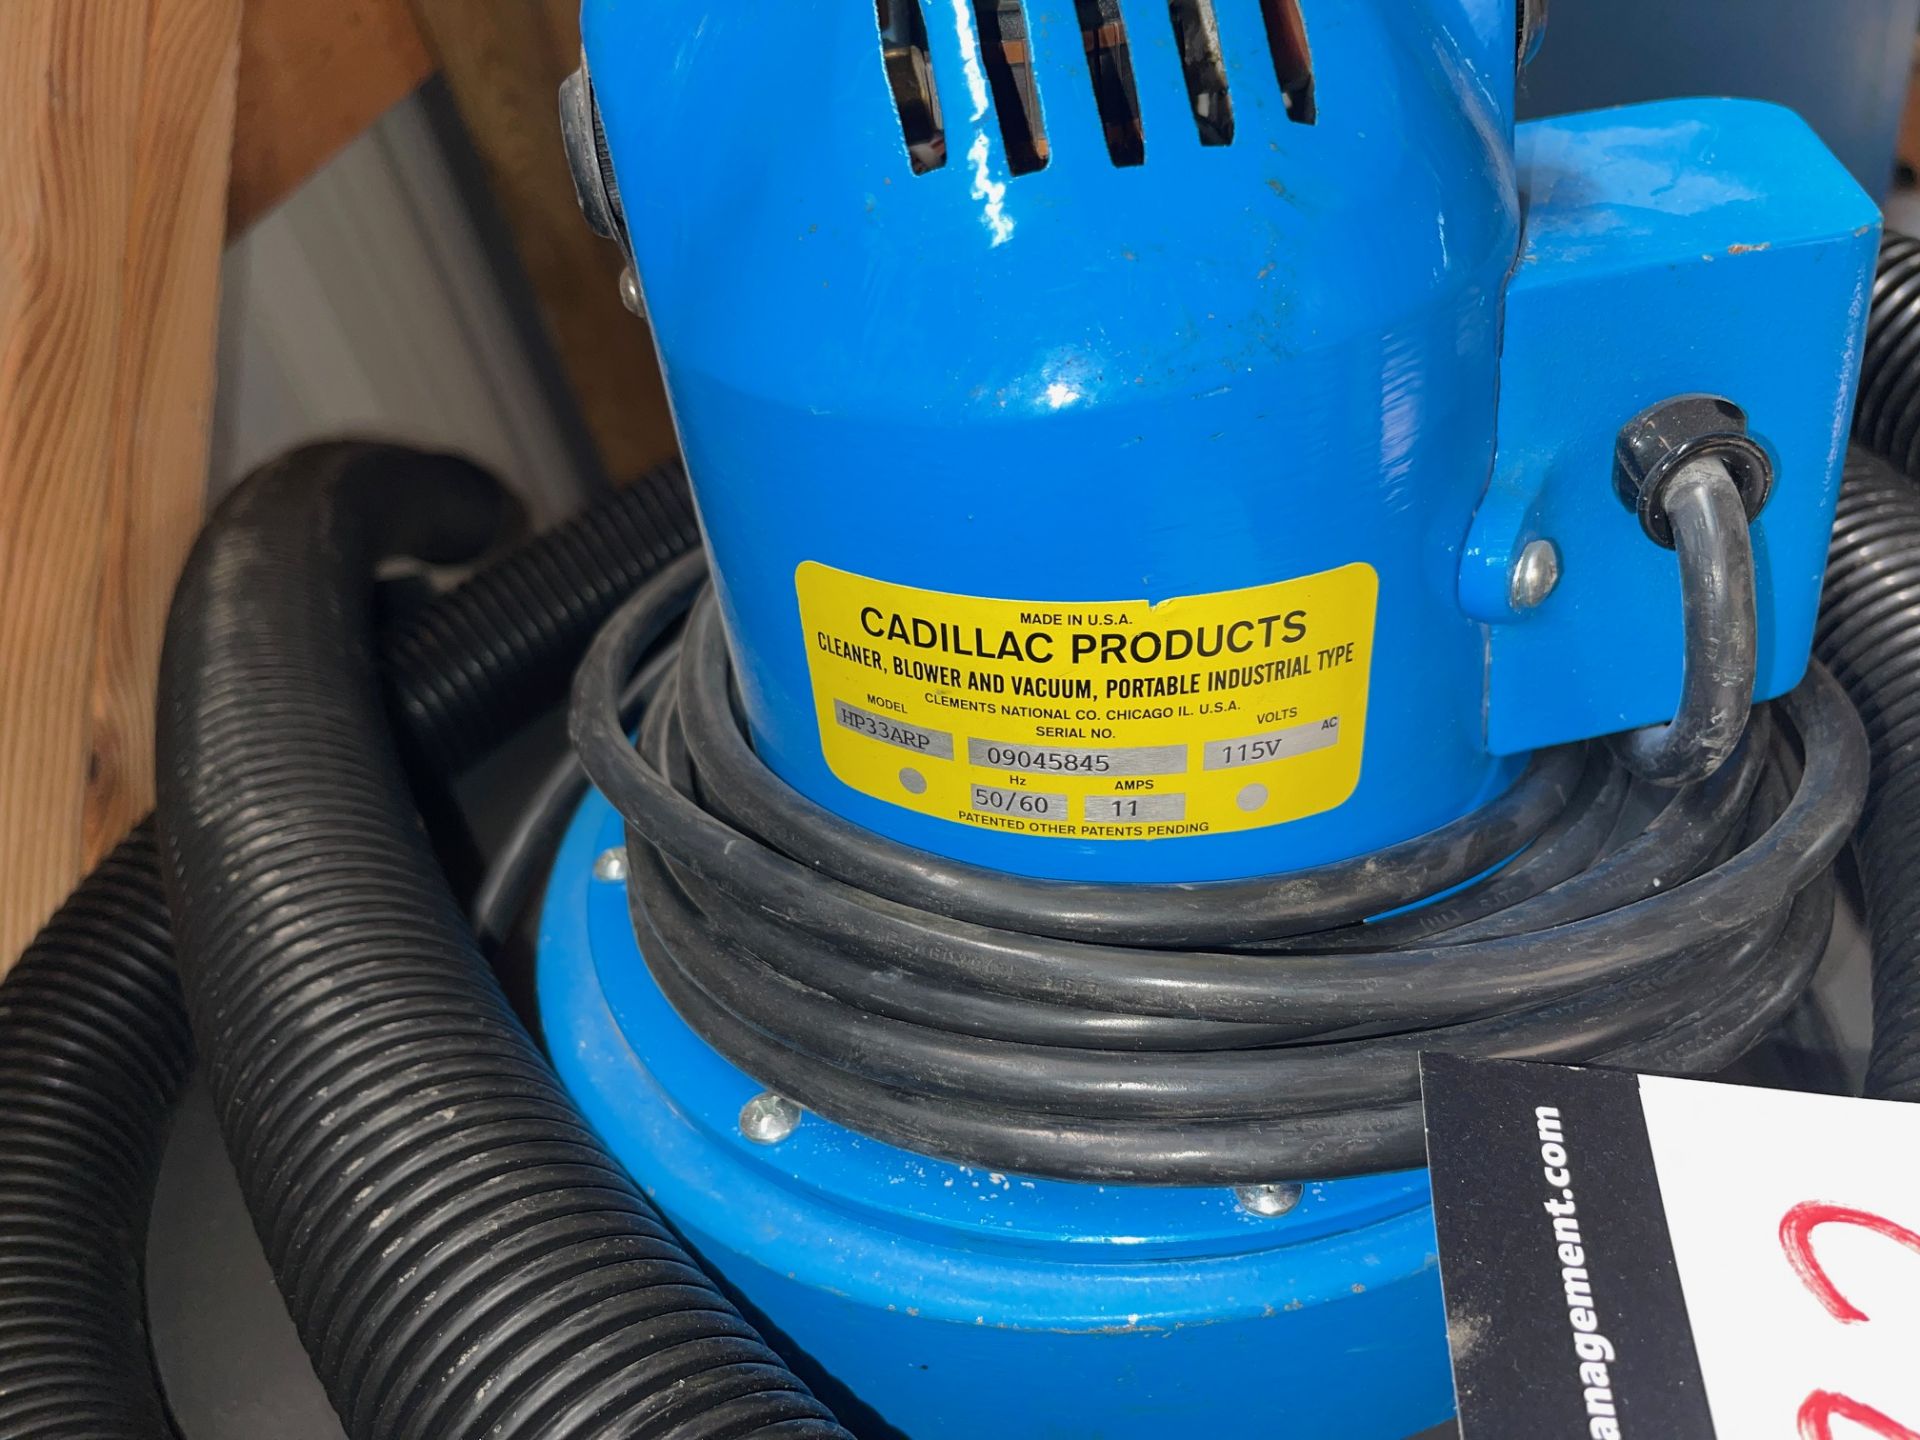 LOT/ CADILLAC PRODUCTS, CLEANER, BLOWER, VACUUM, MO -HP33APP, 115 V, 11 AMP - Image 2 of 2